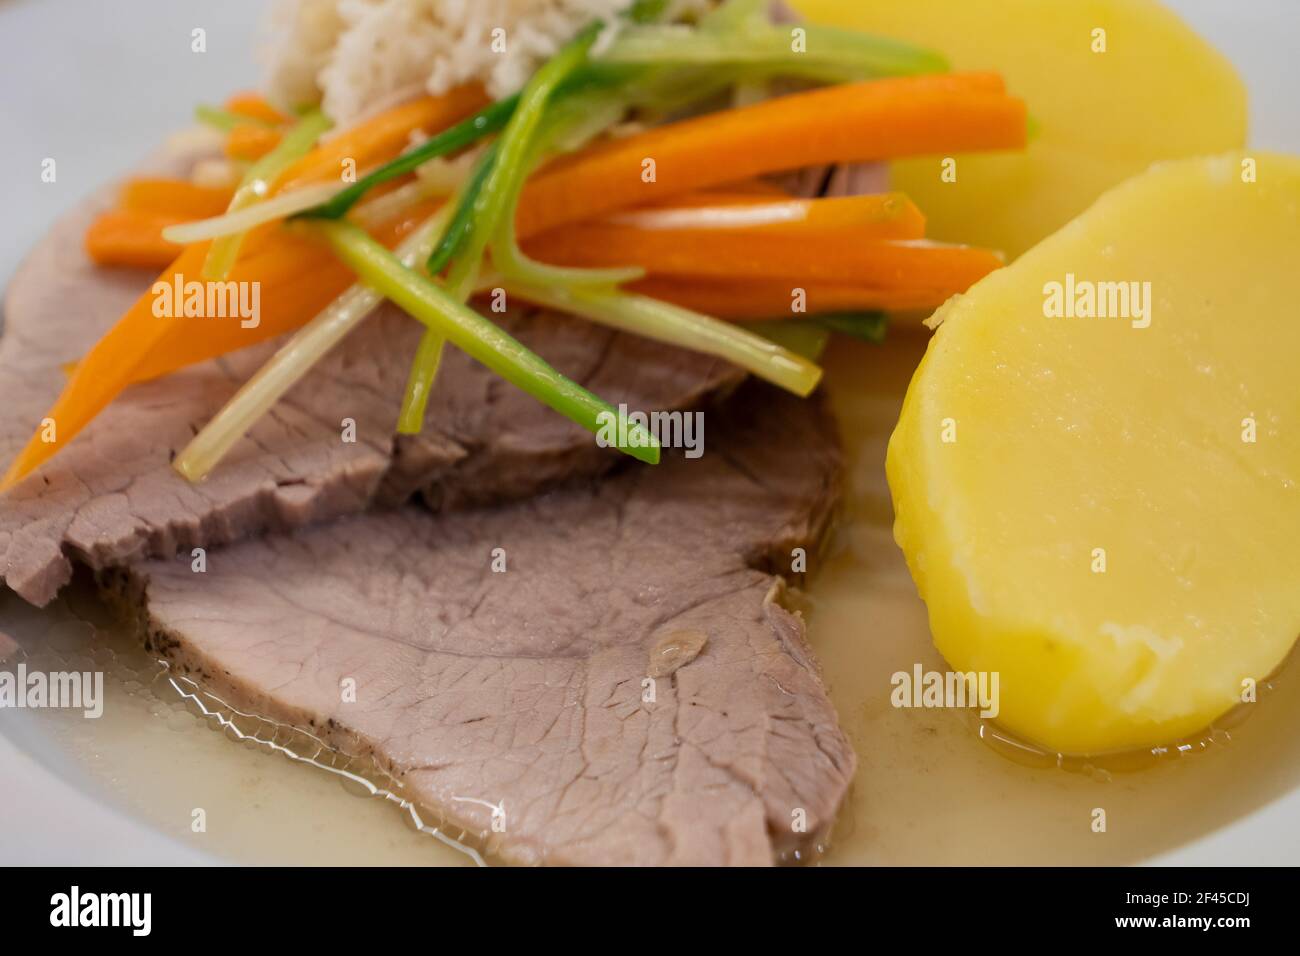 Stewed Pork with Root Vegetable Julienne of Carrots, Leeks, Horseradish and Potatoes called Steirisches Wurzelfleisch in Austria Close Up Stock Photo